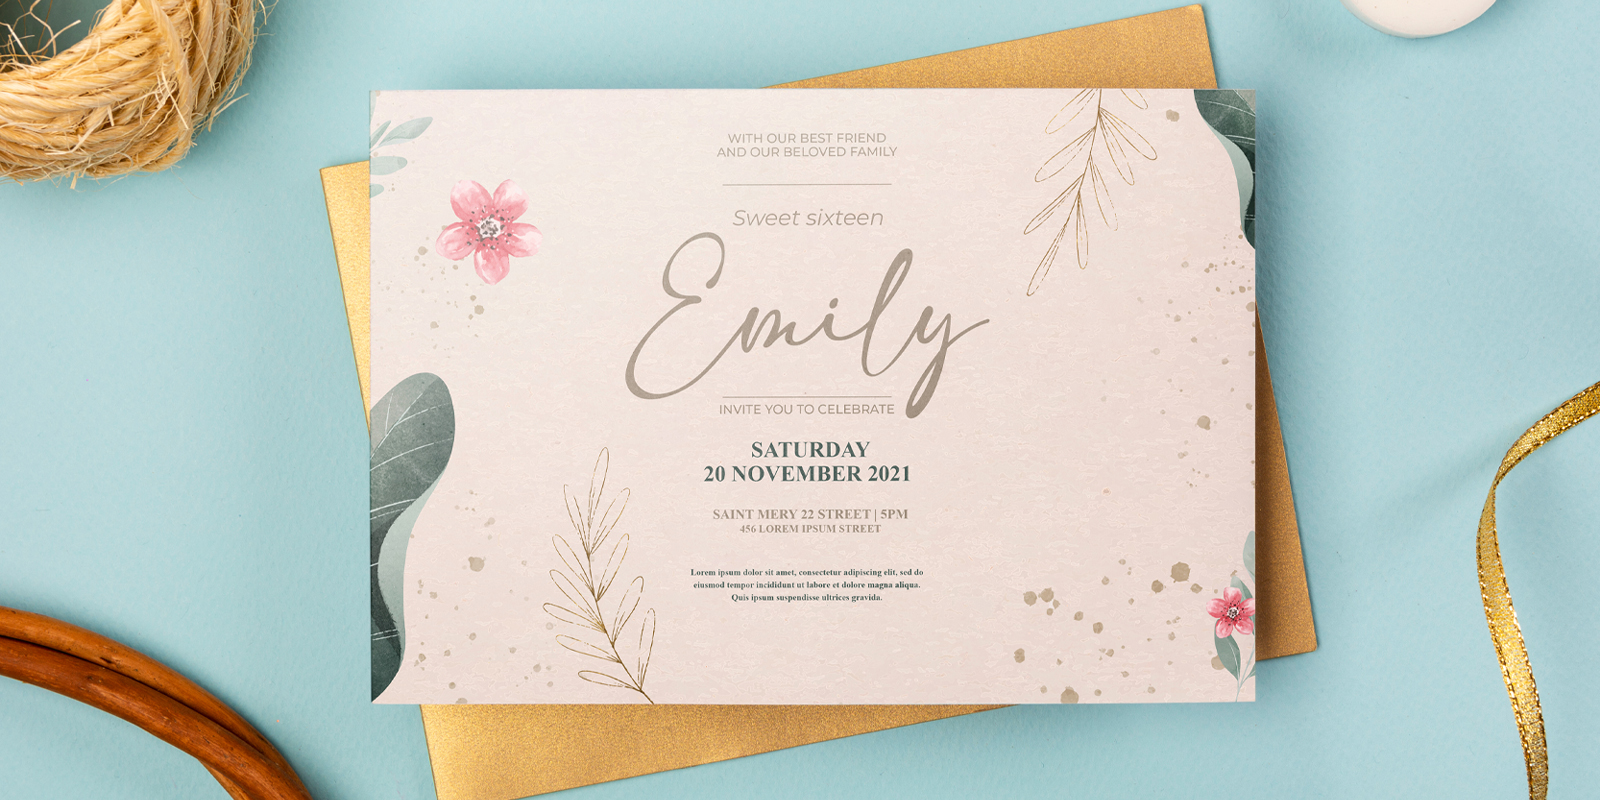 Invitations in Hobart - Print with Pagerr